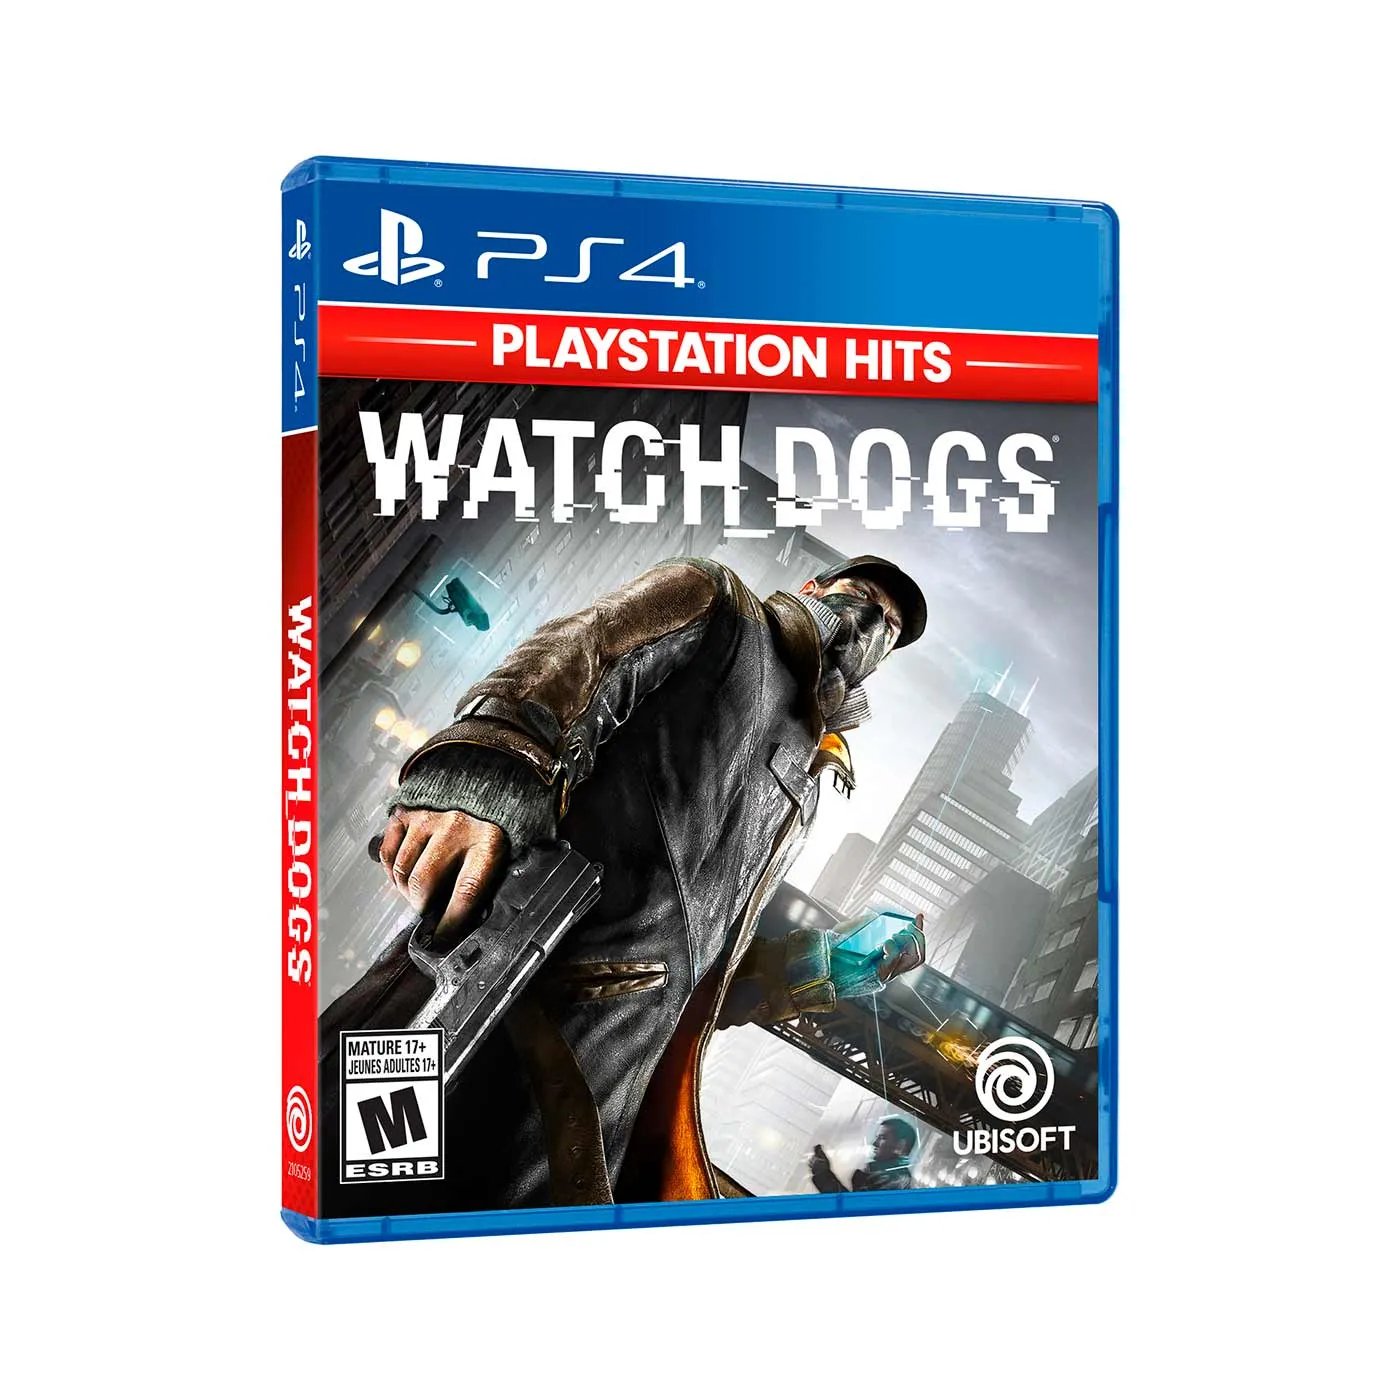 Juego PS4 Watchdogs Hits